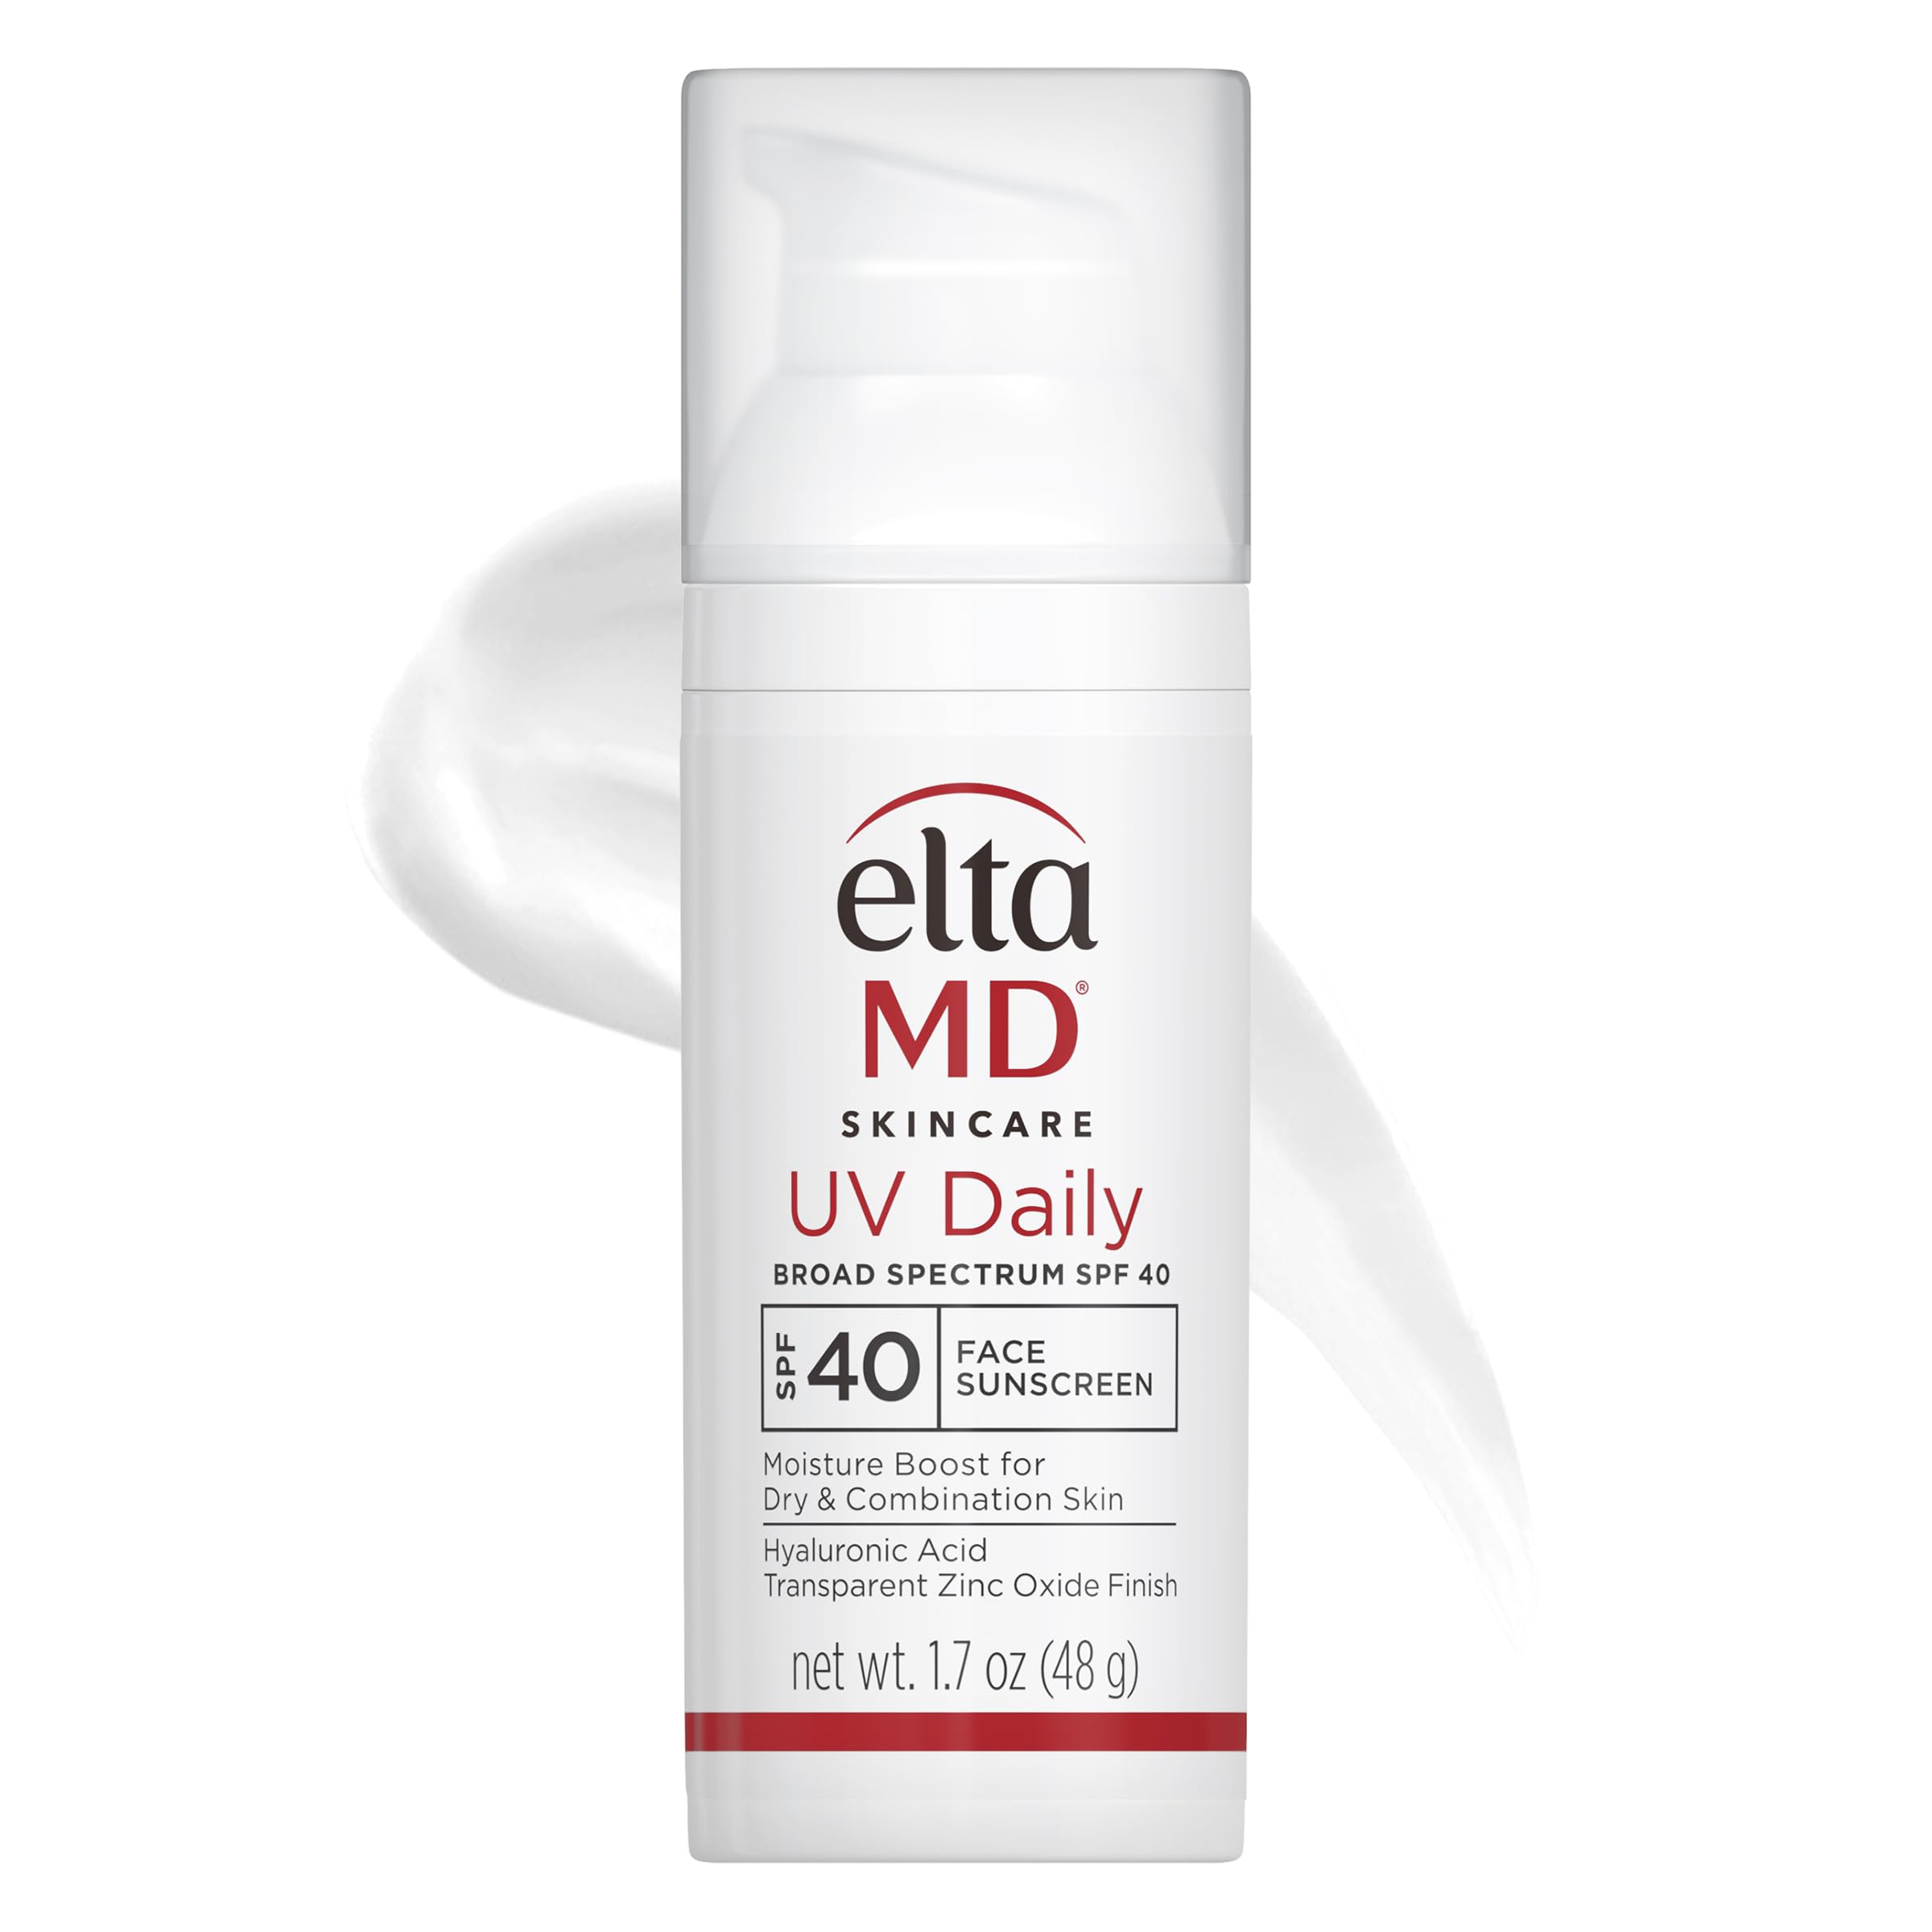 EltaMD UV Daily Face Sunscreen with Zinc Oxide, SPF 40 Facial Sunscreen, Helps Hydrate Skin and Decrease Wrinkles, Lightweight Face Moisturizer Sunscreen, Absorbs into Skin Quickly, 1.7 Oz Pump